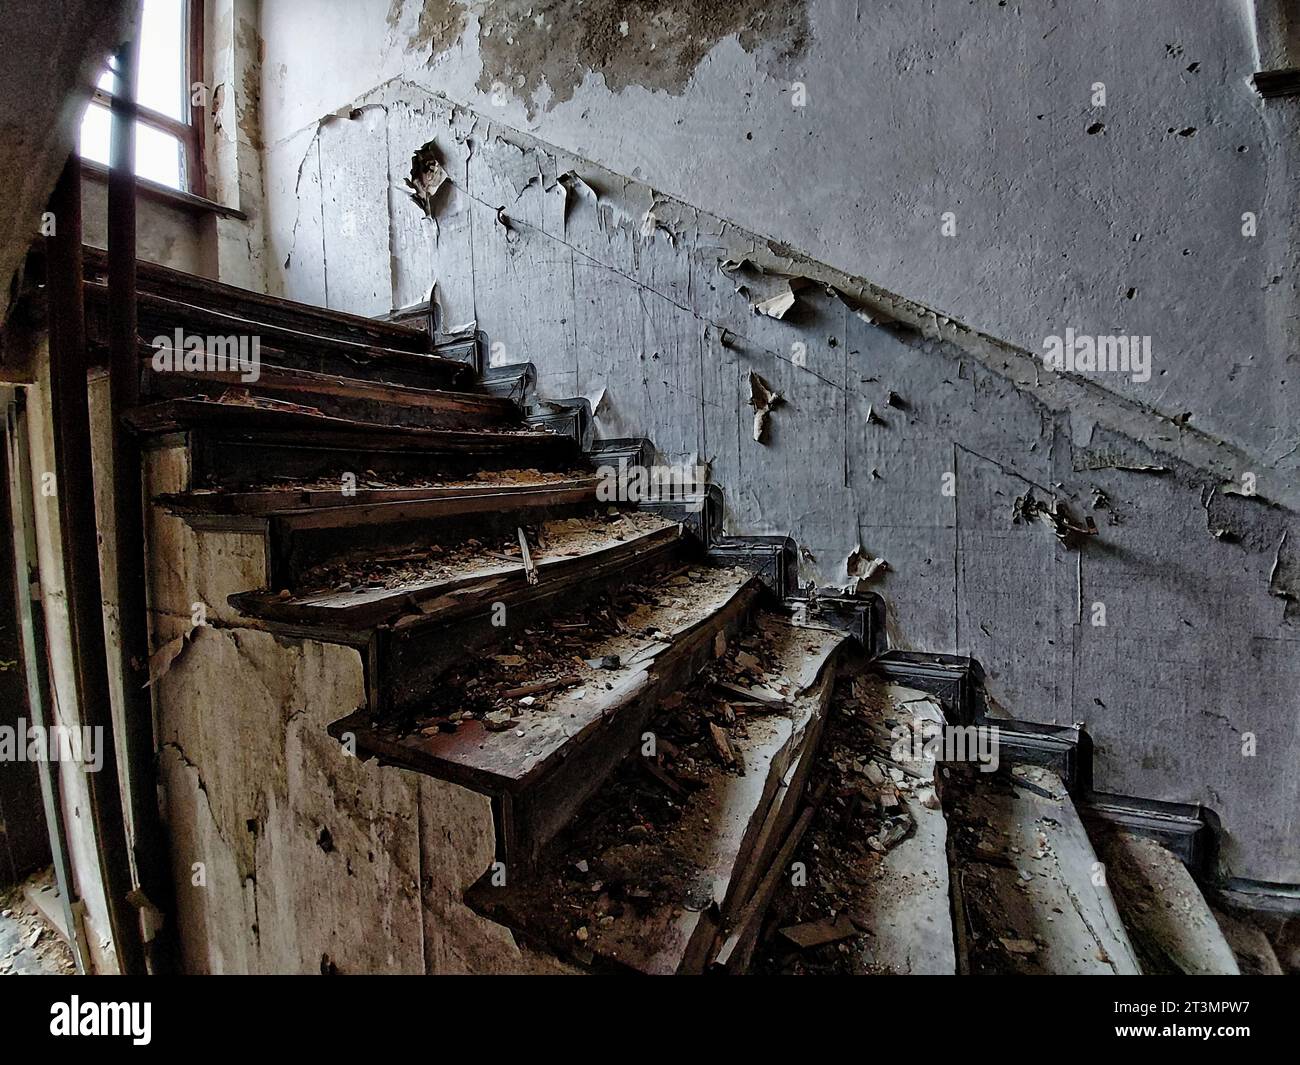 Noisy image of desolate staircase in an abandoned building. Stock Photo